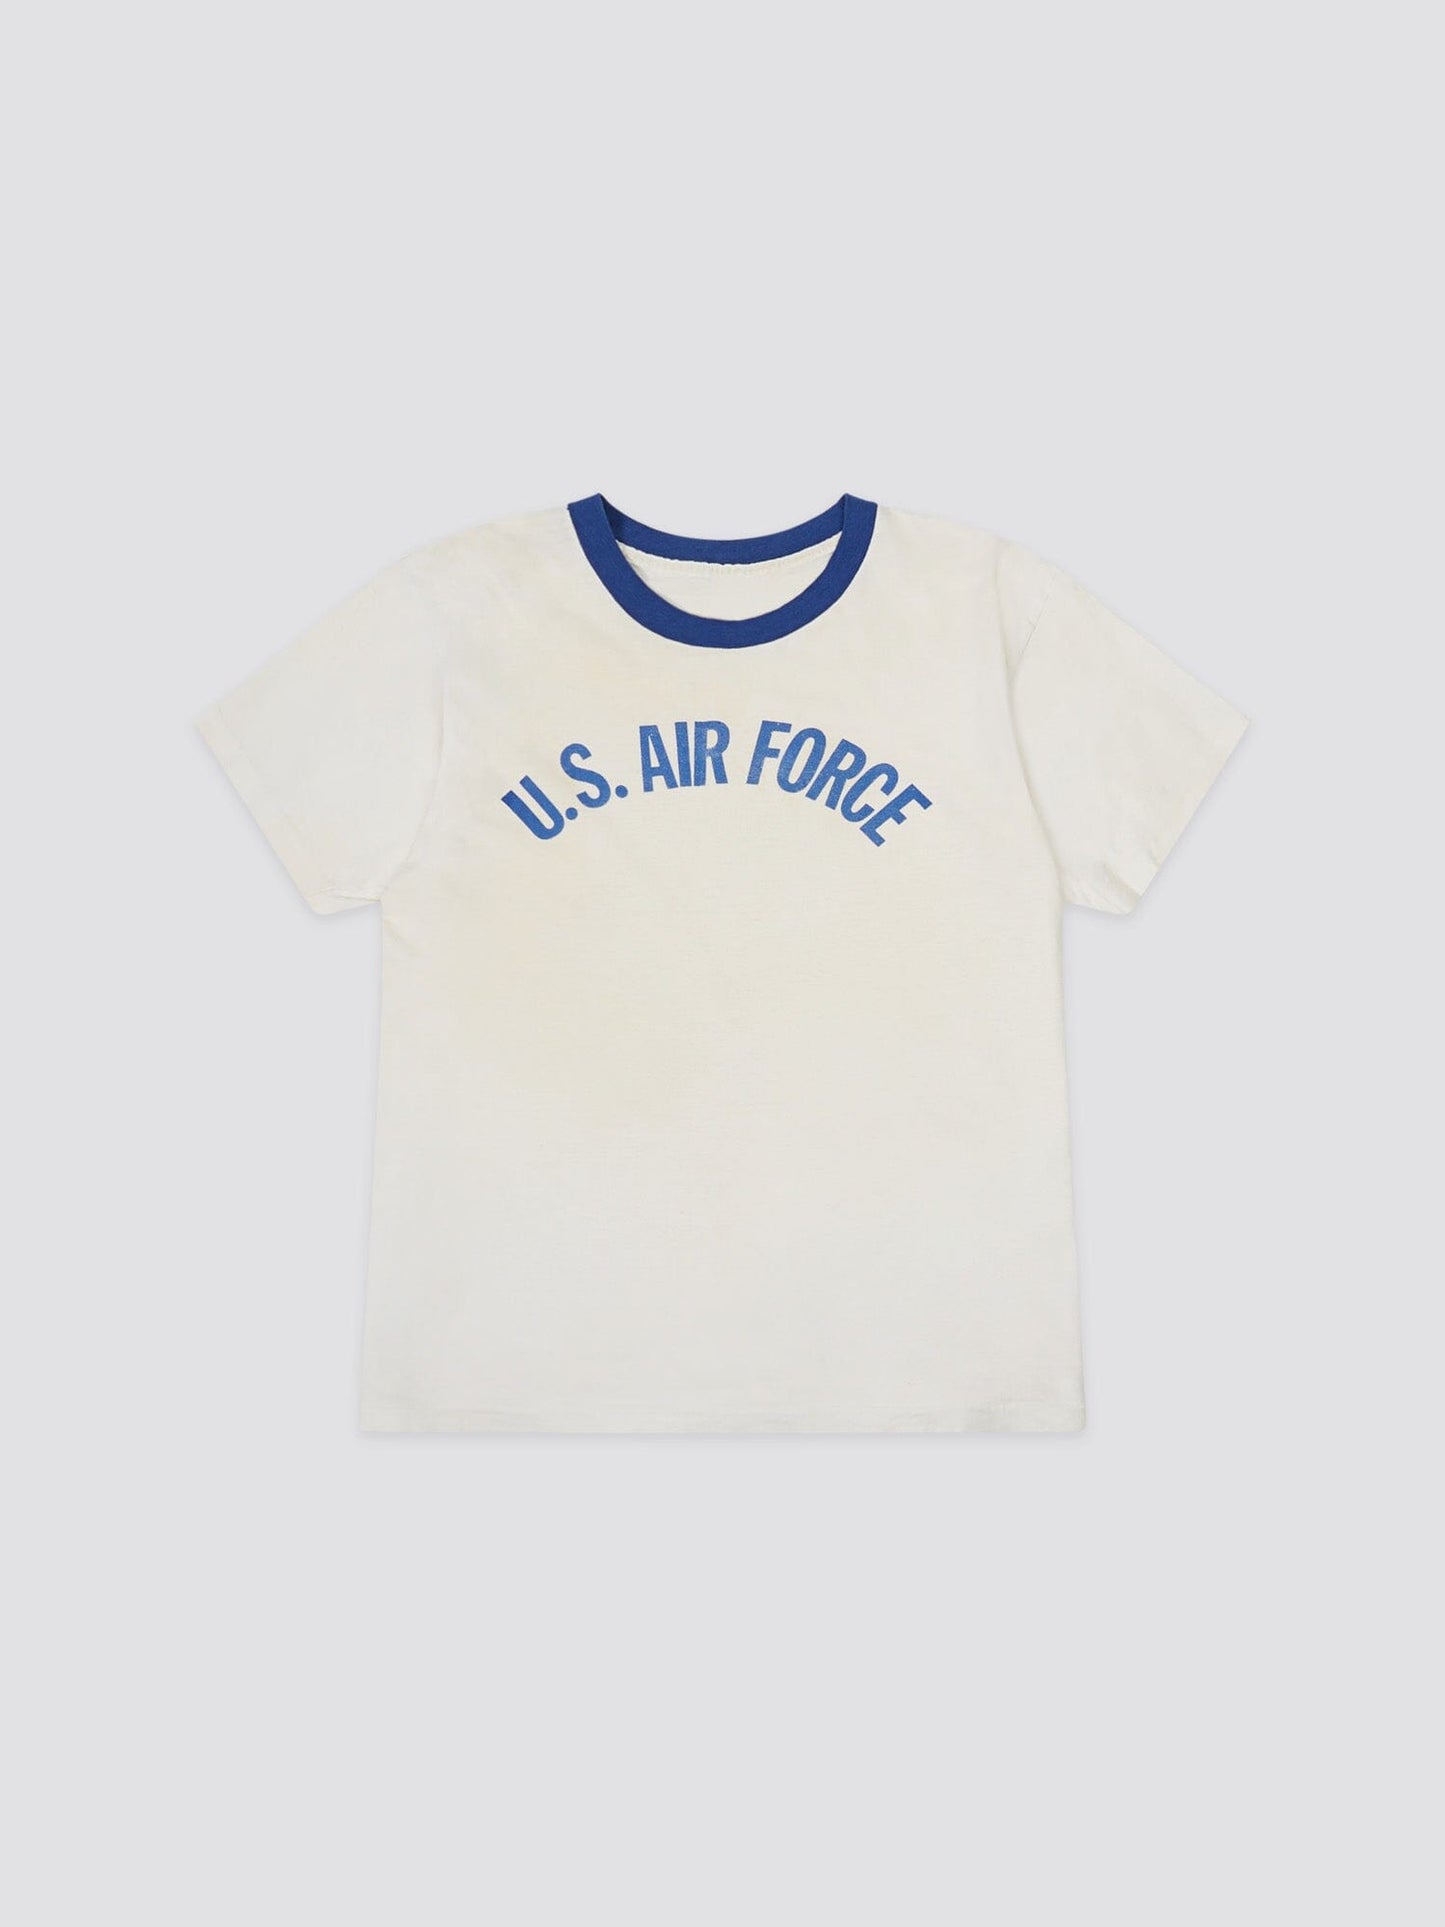 US AIR FORCE 1970S RINGER TSHIRT TOP Alpha Industries WHITE M 